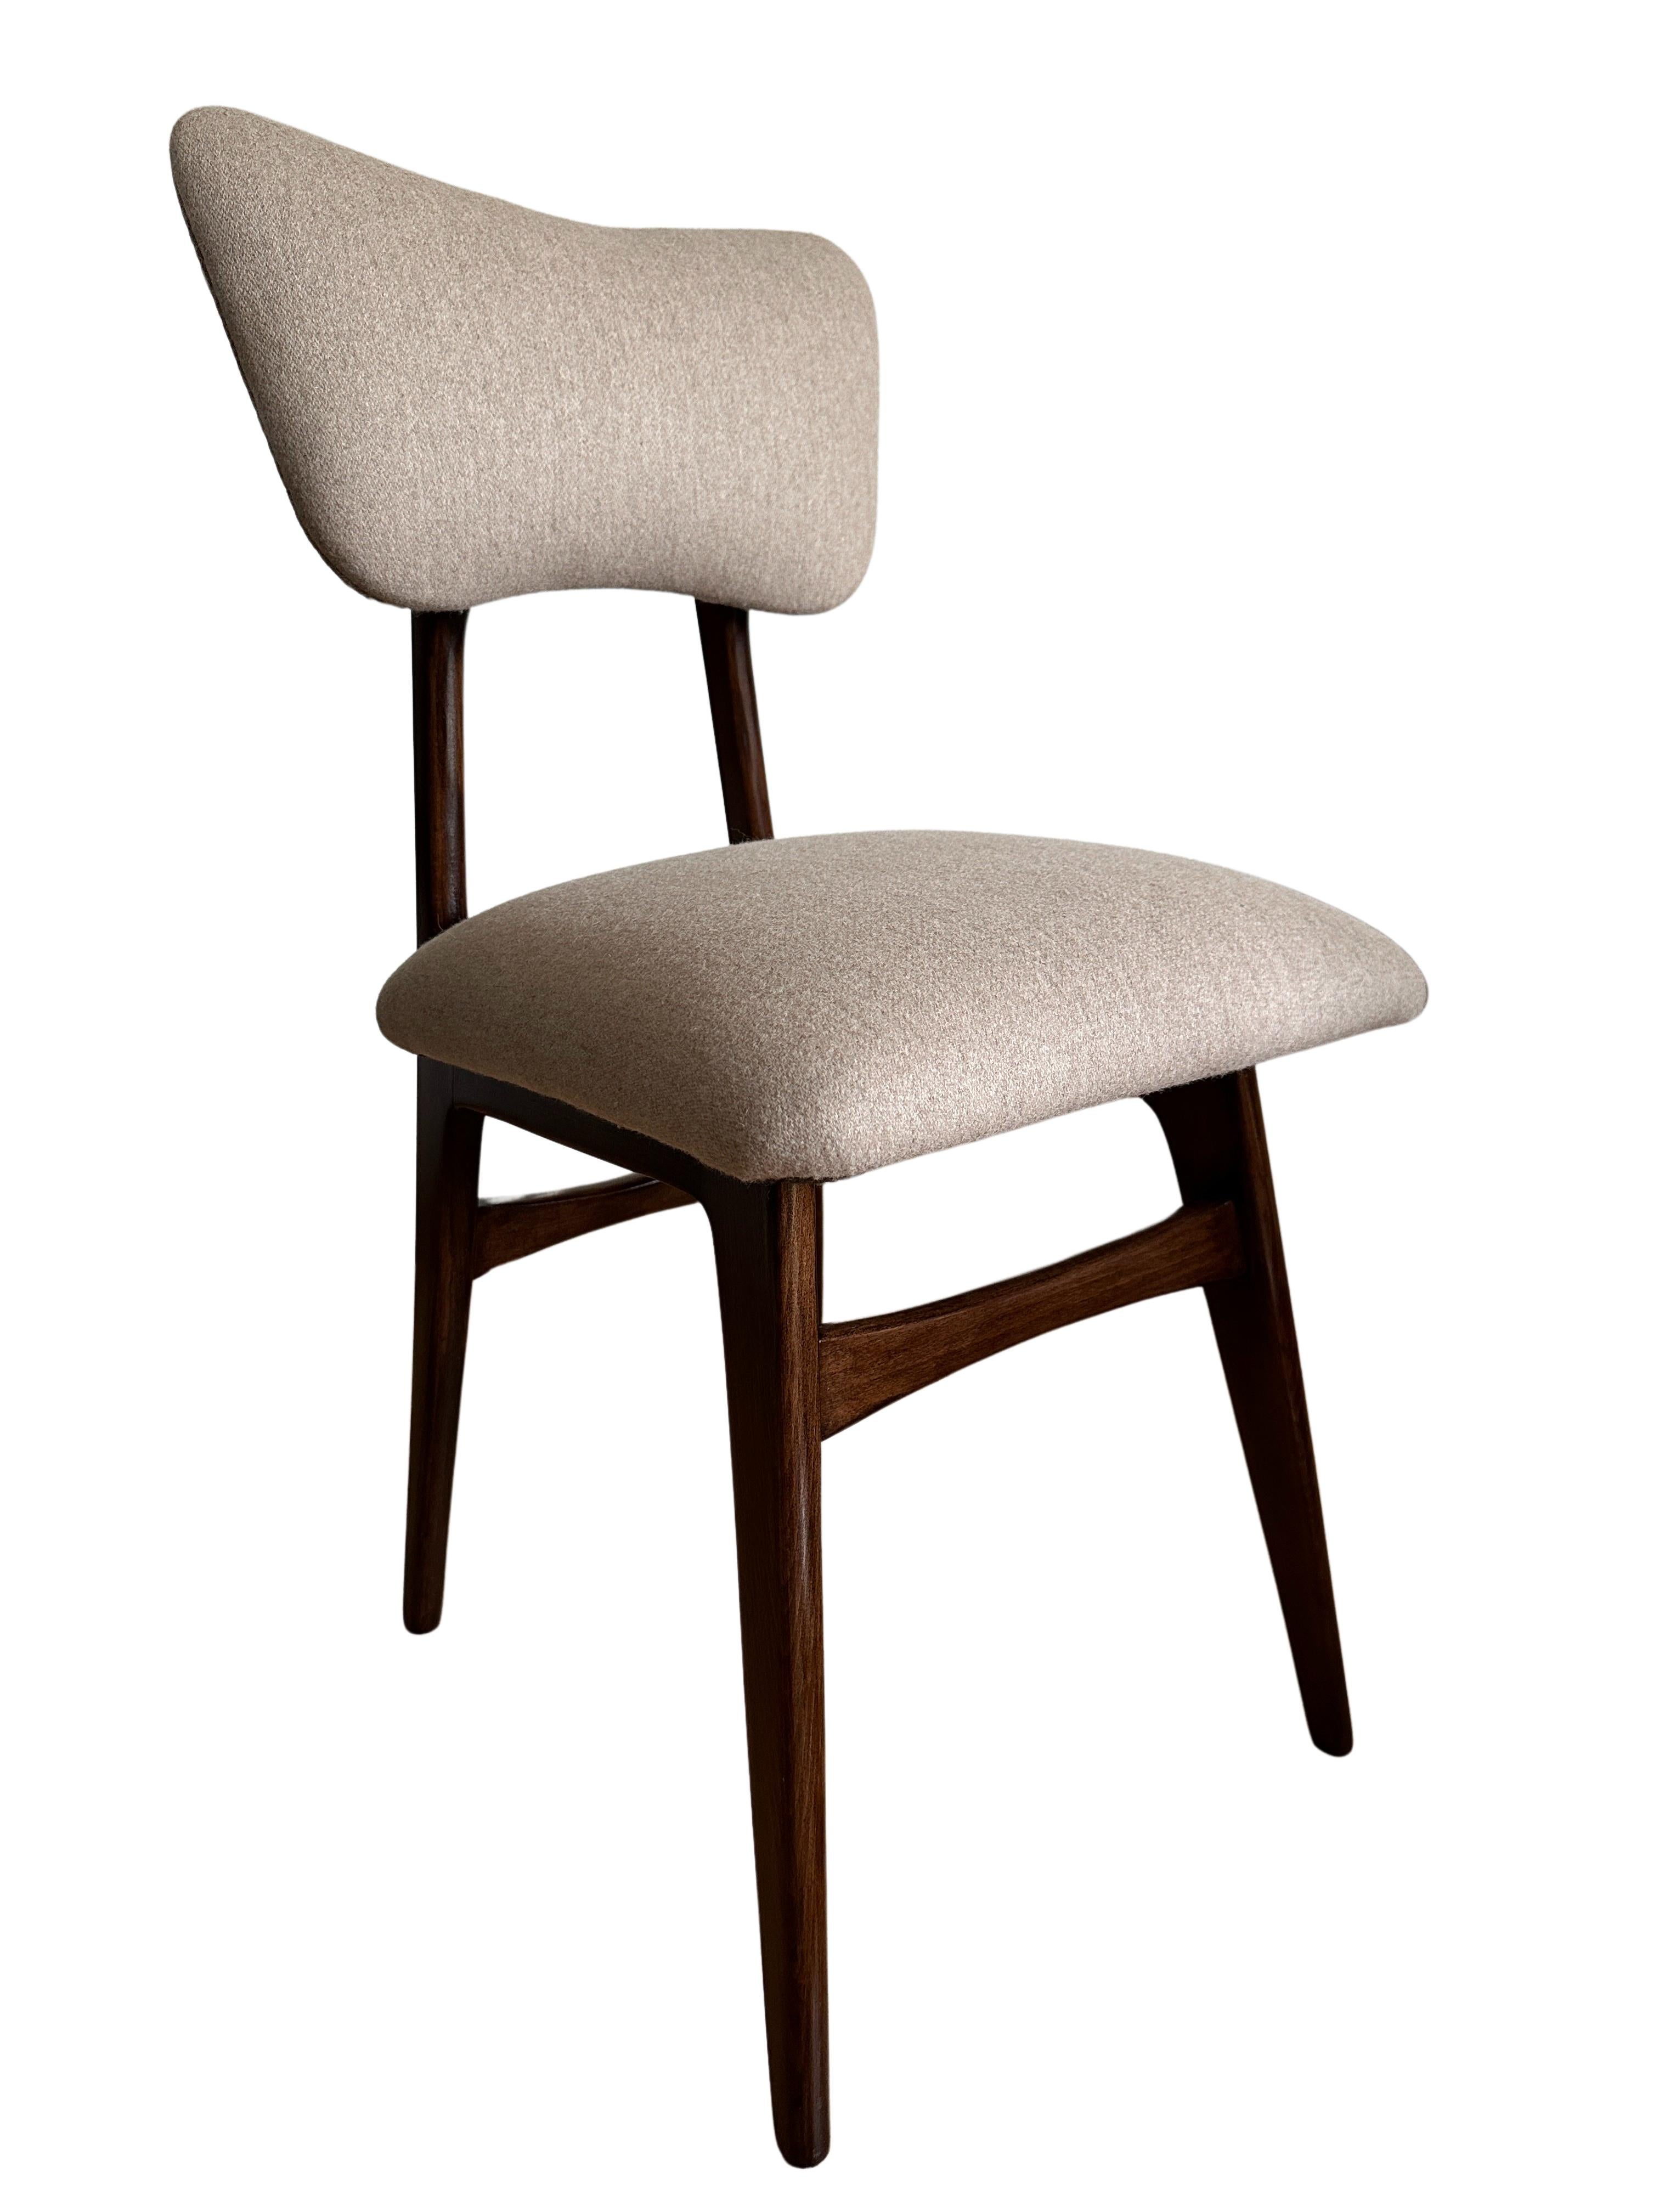 Polish Set of 6 Midcentury Dining Chairs in Beige Wool Upholstery, Poland, 1960s For Sale